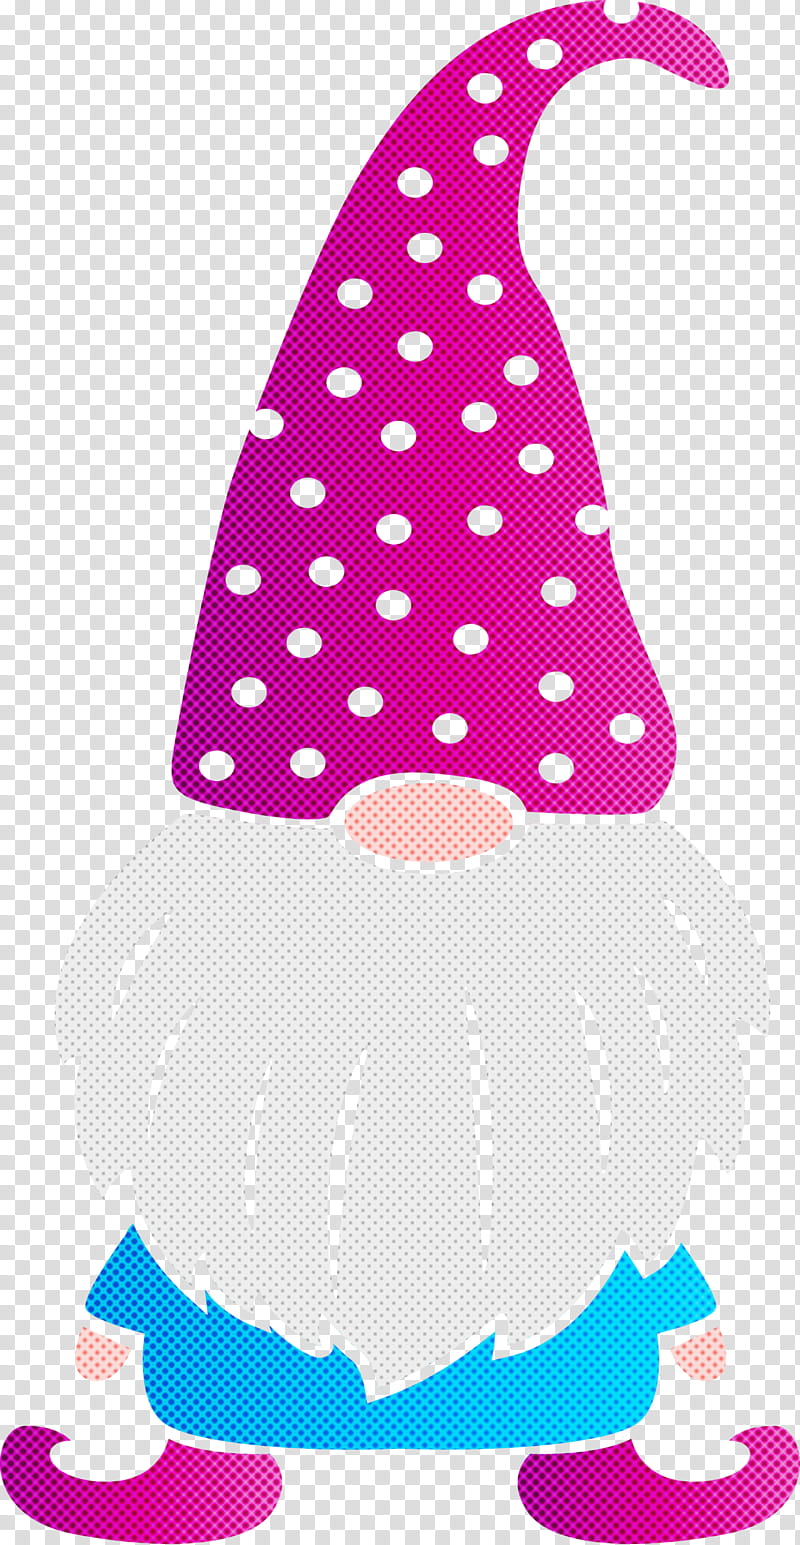 Gnome, Pink, Polka Dot, Party Hat, Cone, Party Supply, Costume Accessory transparent background PNG clipart